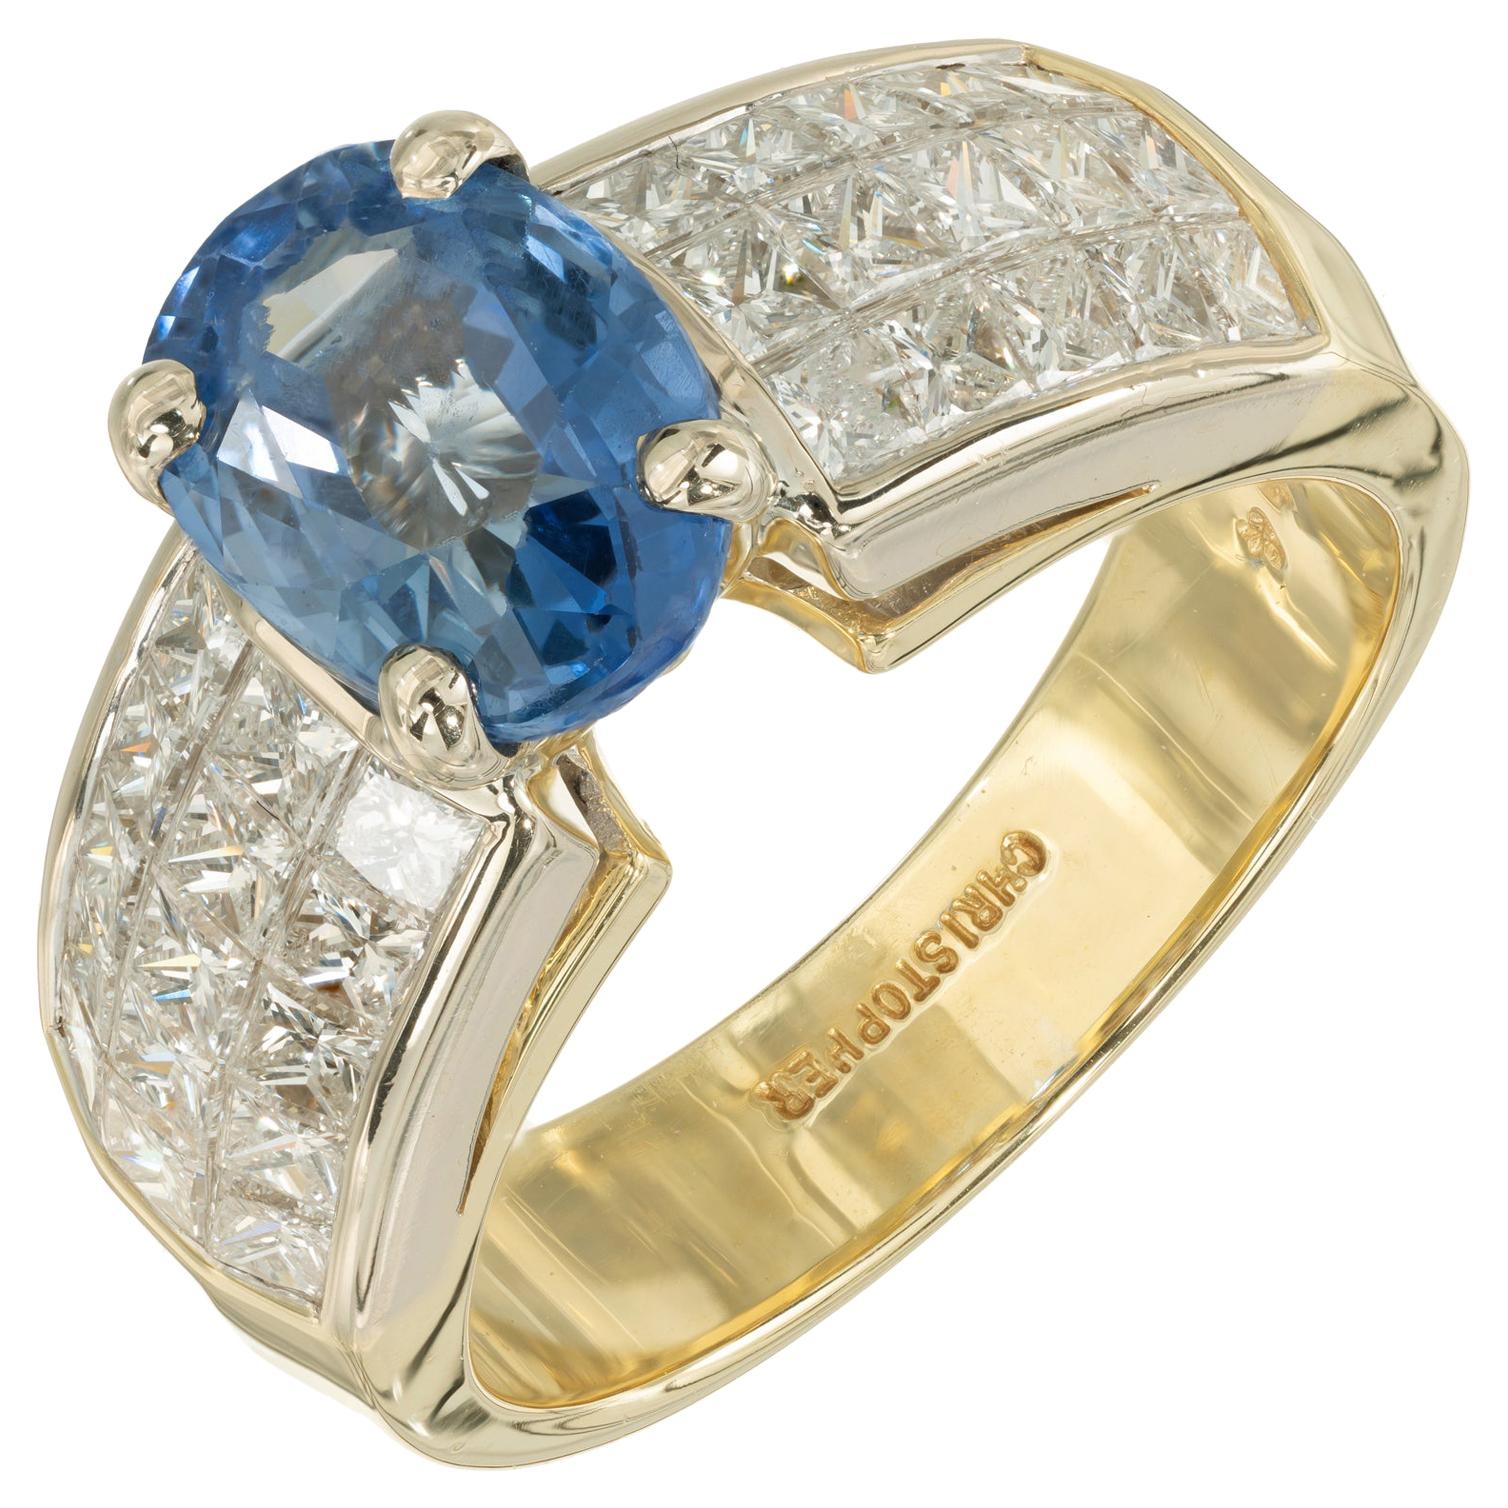 Christopher Designs GIA Certified 2.38 Carat Sapphire Diamond Gold Ring For Sale